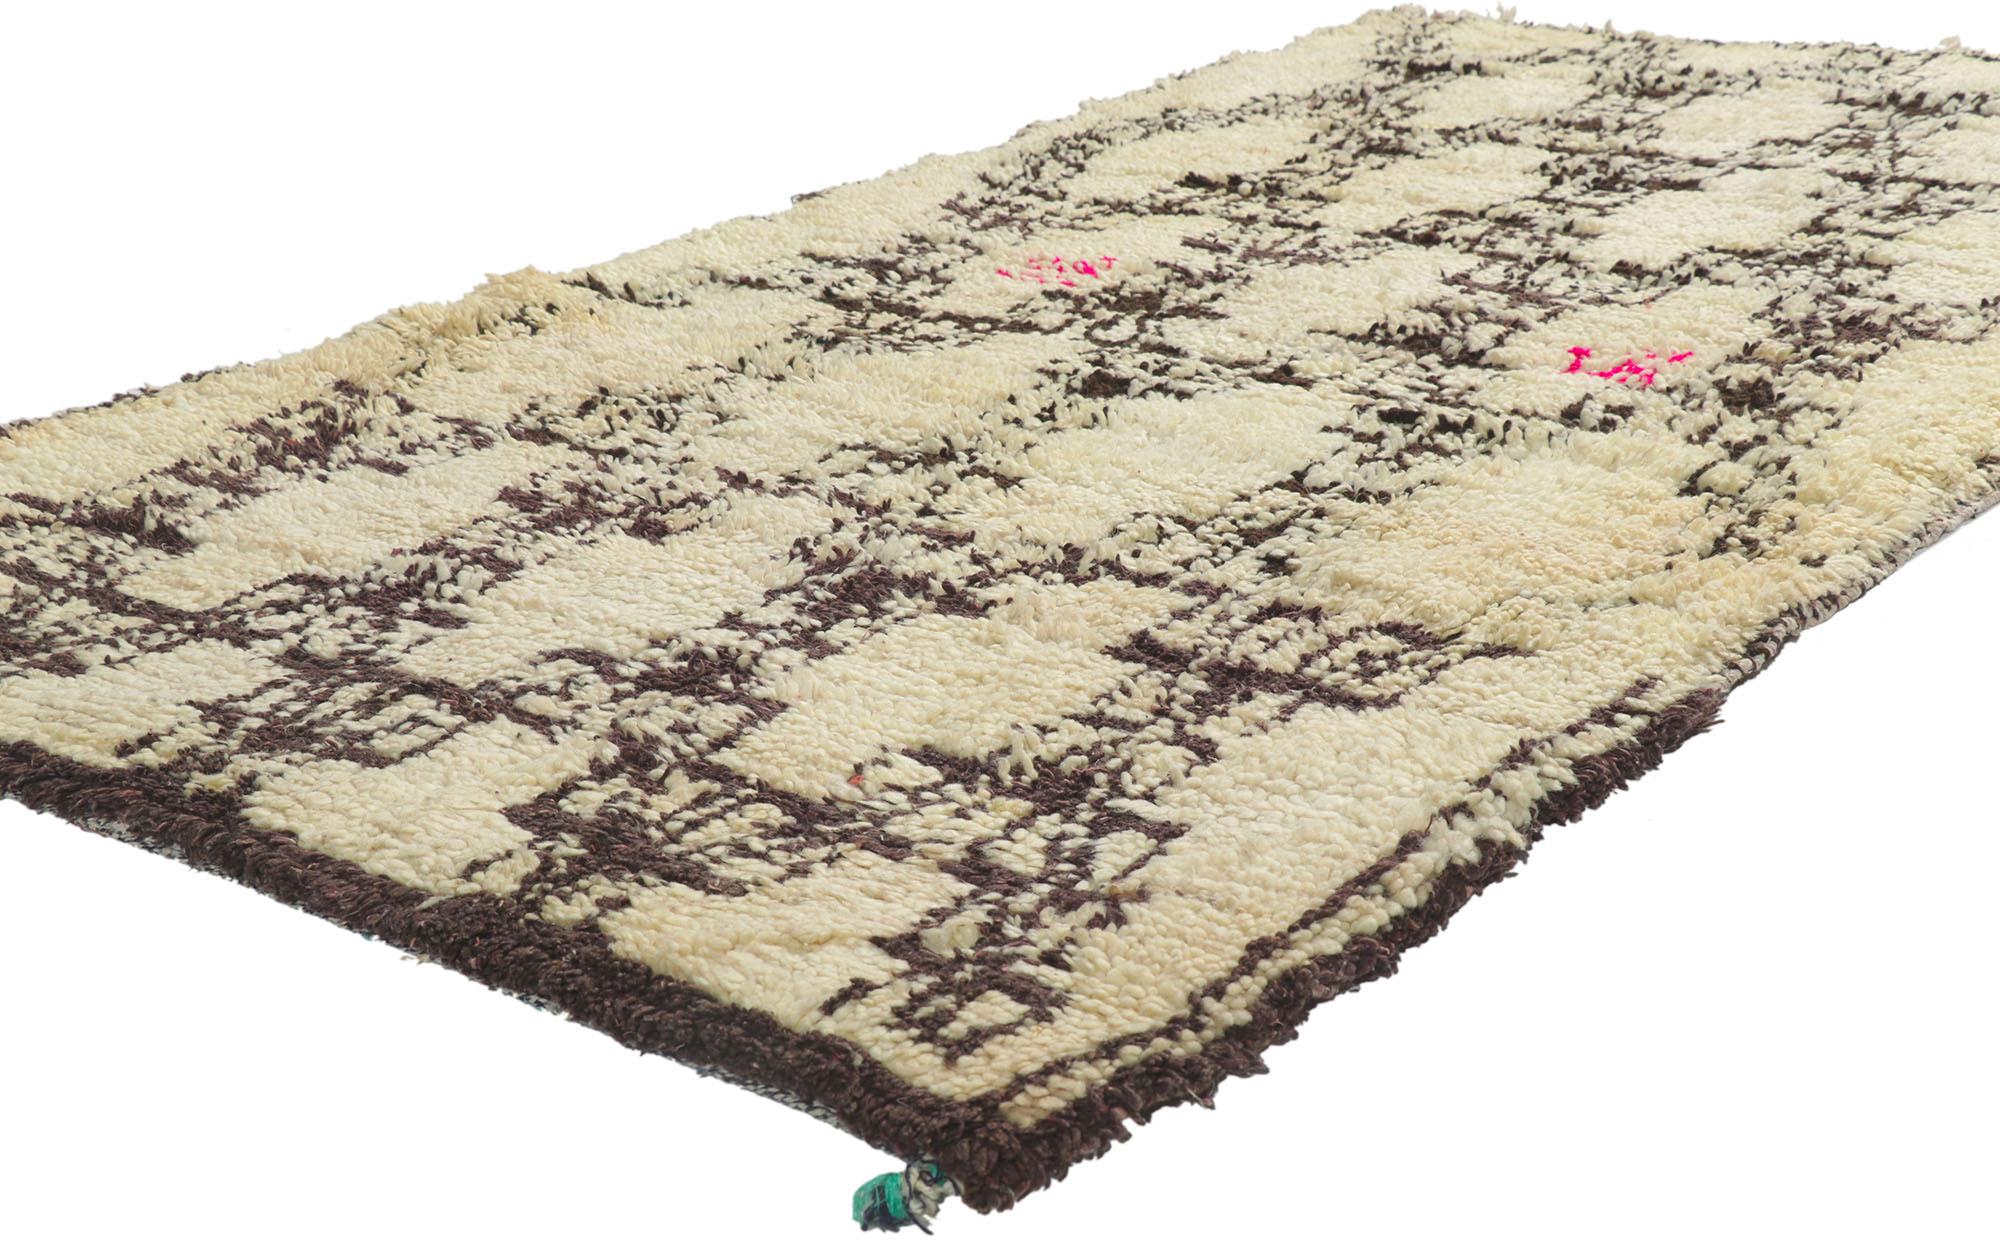 21588 Vintage Moroccan Azilal Rug, 03'11 x 07'04.
Neutral bohemian meets natural elegance in this hand knotted wool vintage Berber Moroccan Azilal rug. The intricate lattice and neutral colors woven into piece work together creating a simple and